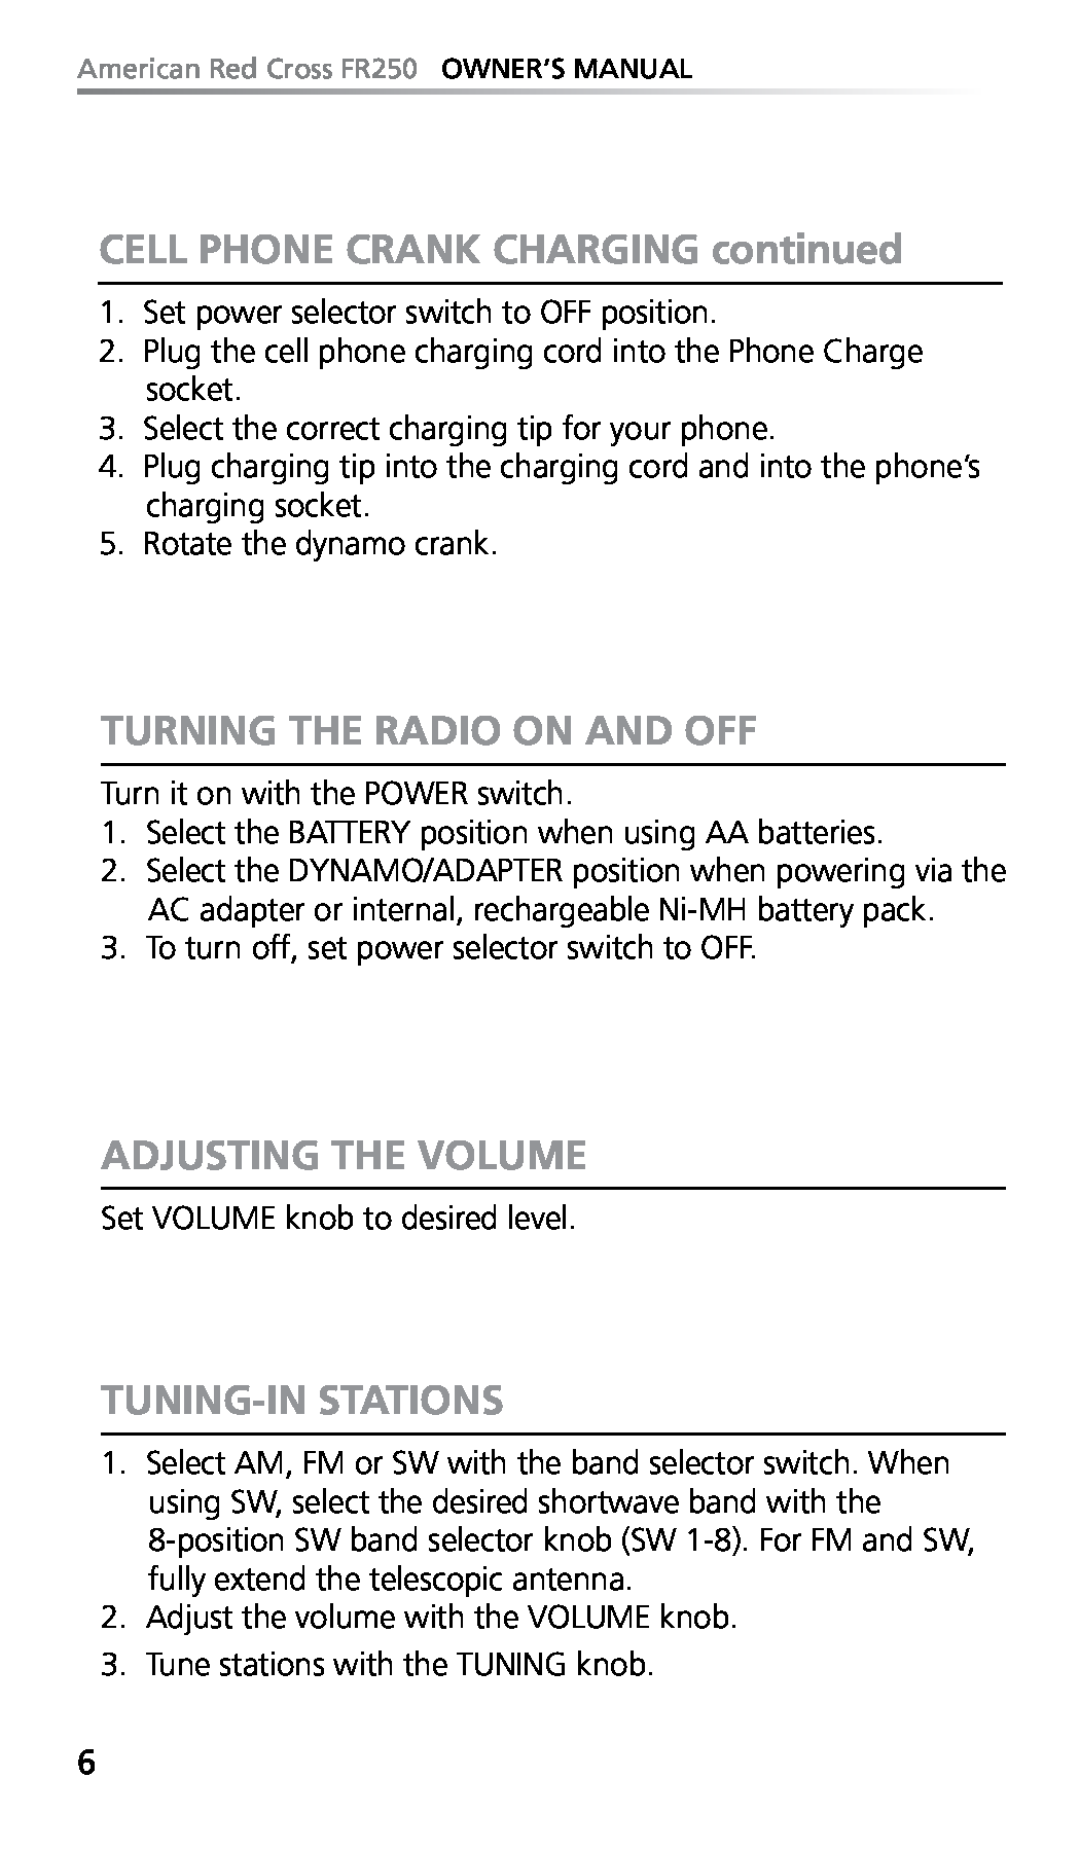 Eton FR250 CELL PHONE CRANK CHARGING continued, Turning The Radio On And Off, Adjusting The Volume, Tuning-Instations 